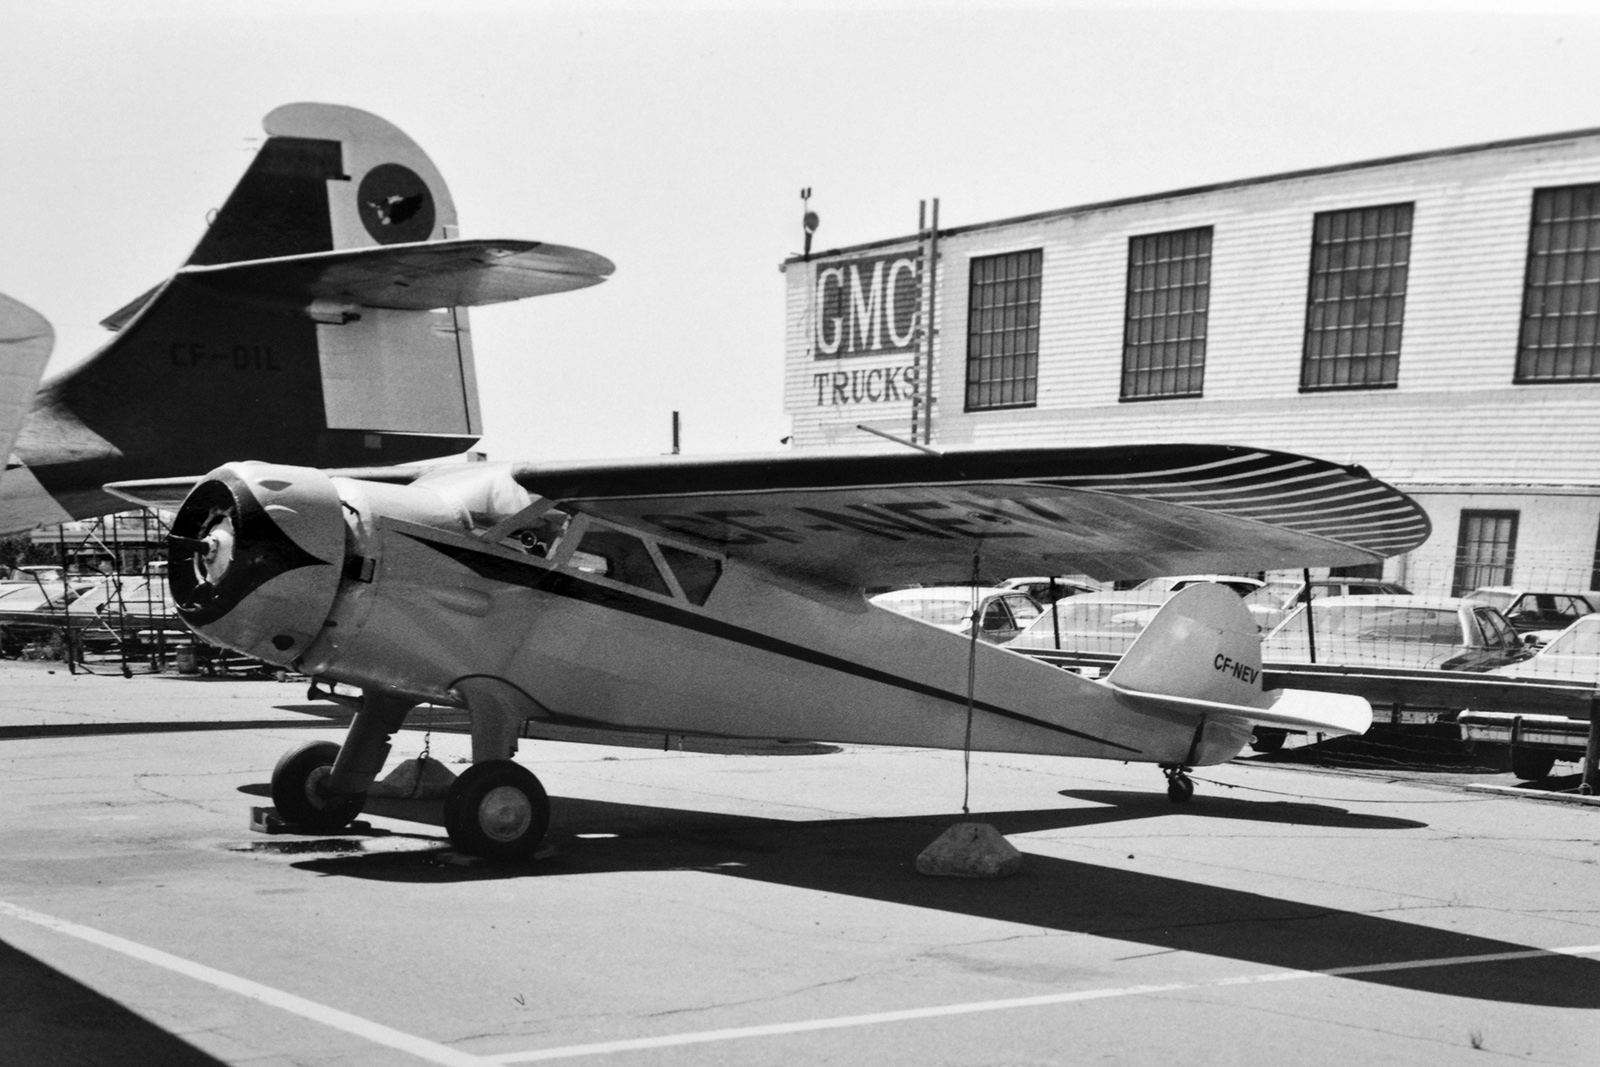 Aircraft parked by GMC trucks by Hangar 14